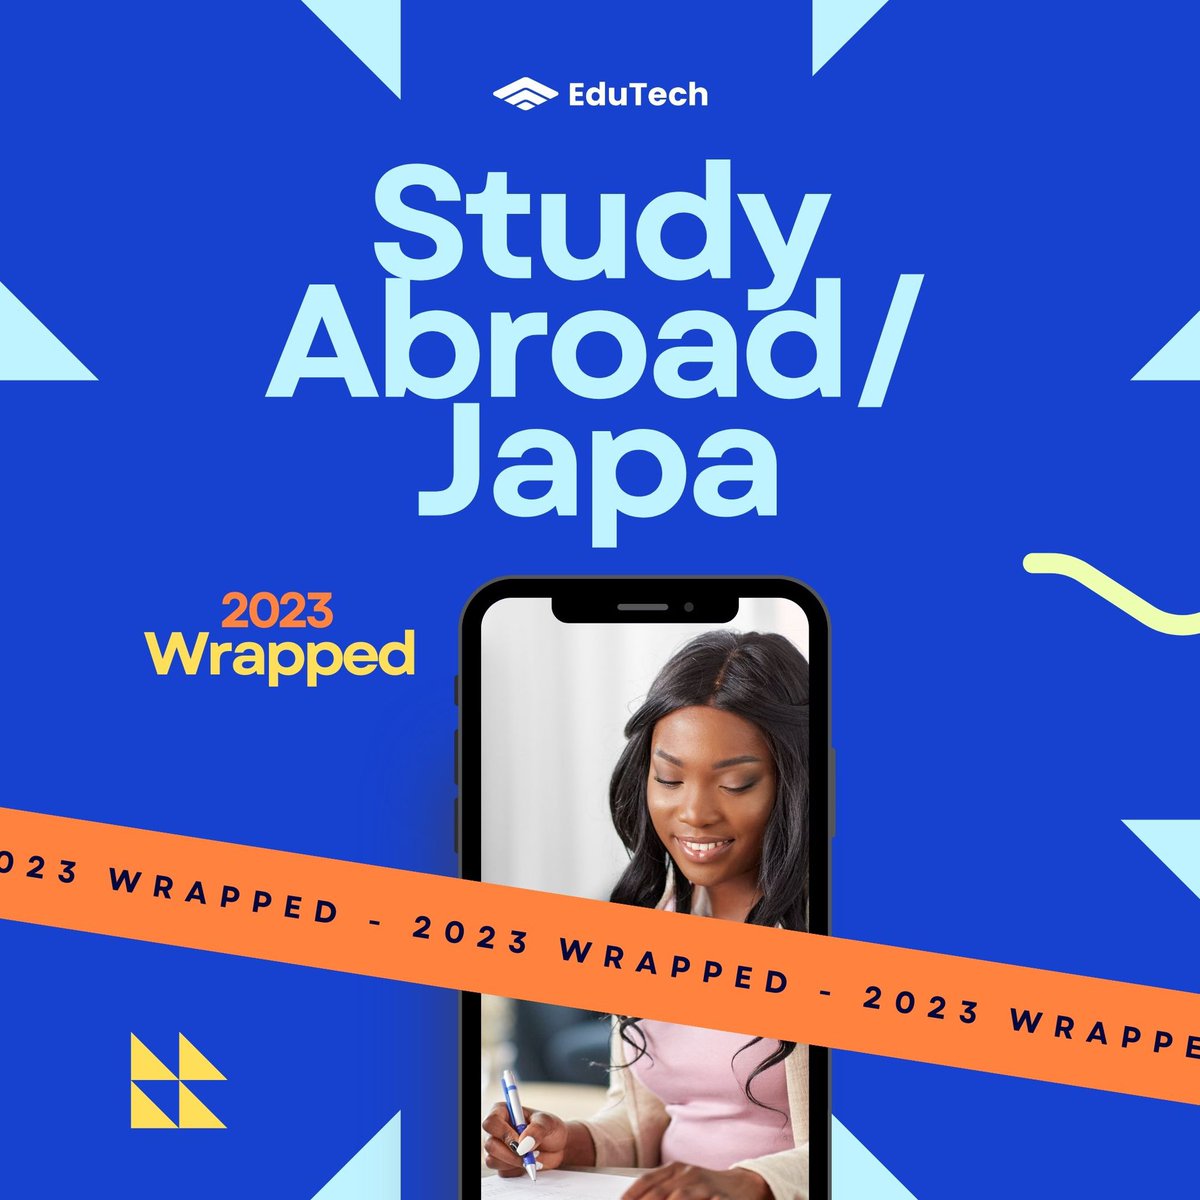 Your 2023 #Wrapped is here! Which of these can you relate to the most? 😄 

Add yours in the comments!

(check thread👇)

#studyabroad #schoolabroad #travel #education #university #2023wrapped #career #EduTechBusiness